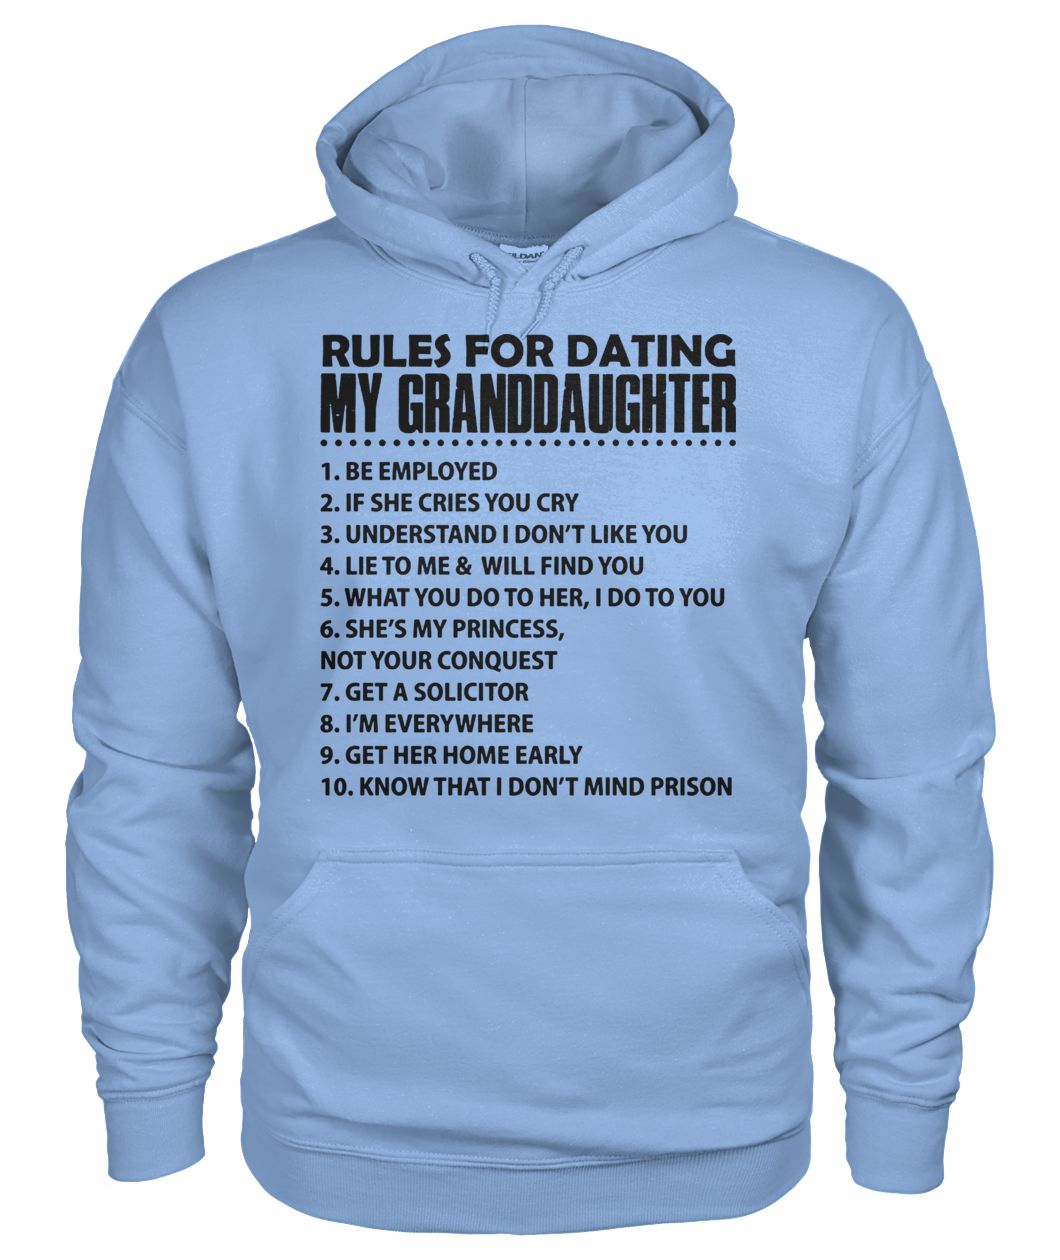 Rules for dating my granddaughter be employed if she cries you cry gildan hoodie